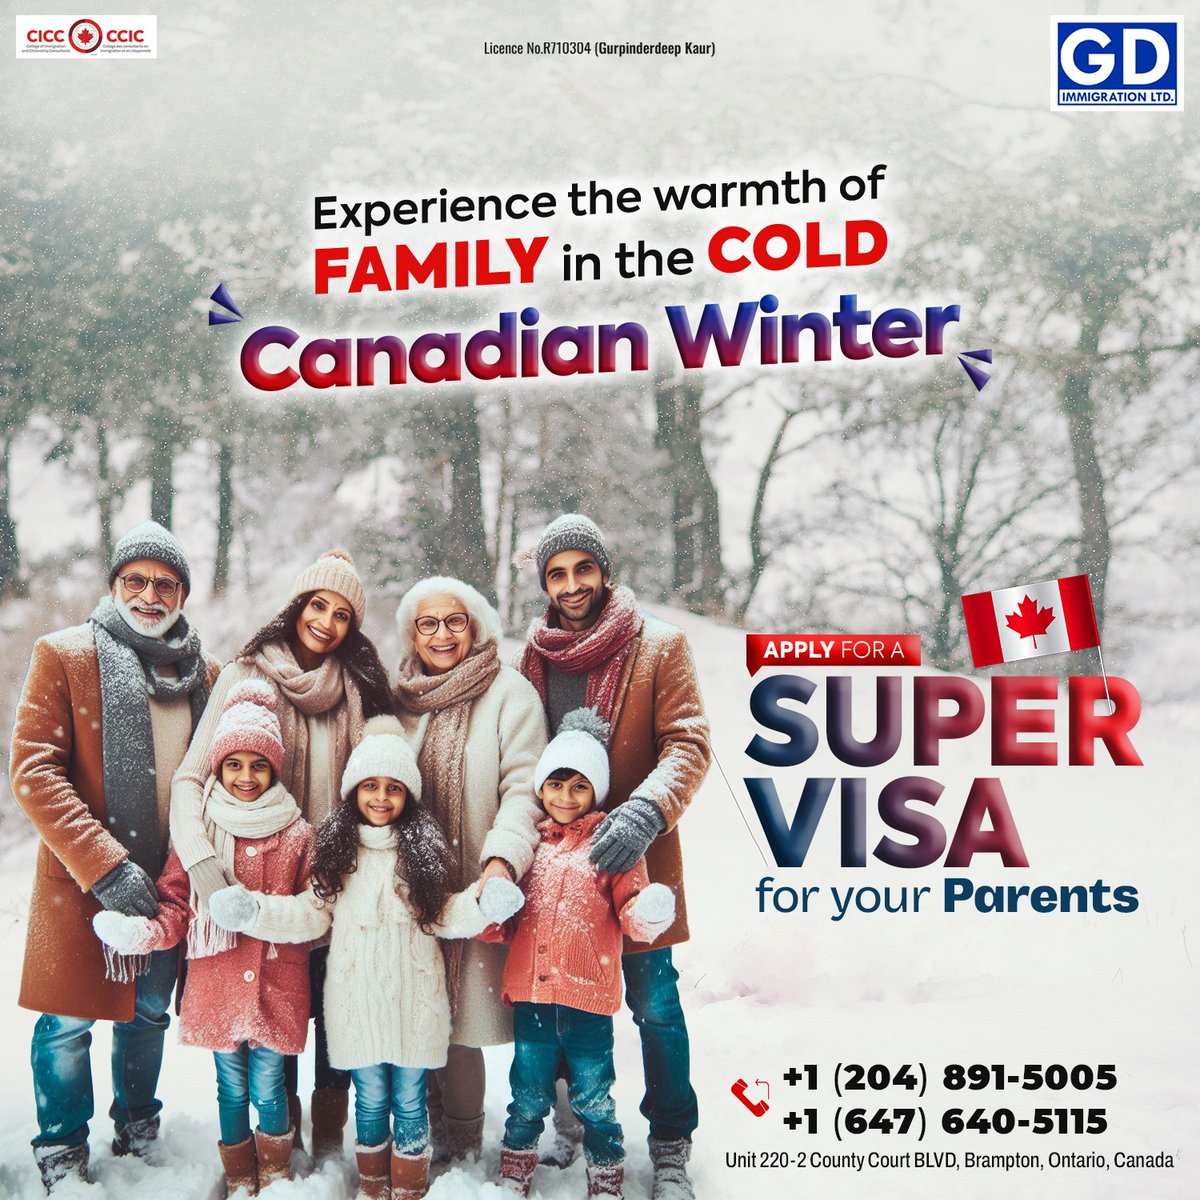 Secure a Super Visa for your parents and immerse yourselves in the magic of Canada's winter wonderland. Start the visa application today! ❄️👨‍👩‍👧‍👦🇨🇦 

#GDImmigration #SuperVisaExperience #ExtendedStays #ParentalVisit #ContactUs #canada #supervisa #visa #immigration #visa #toronto